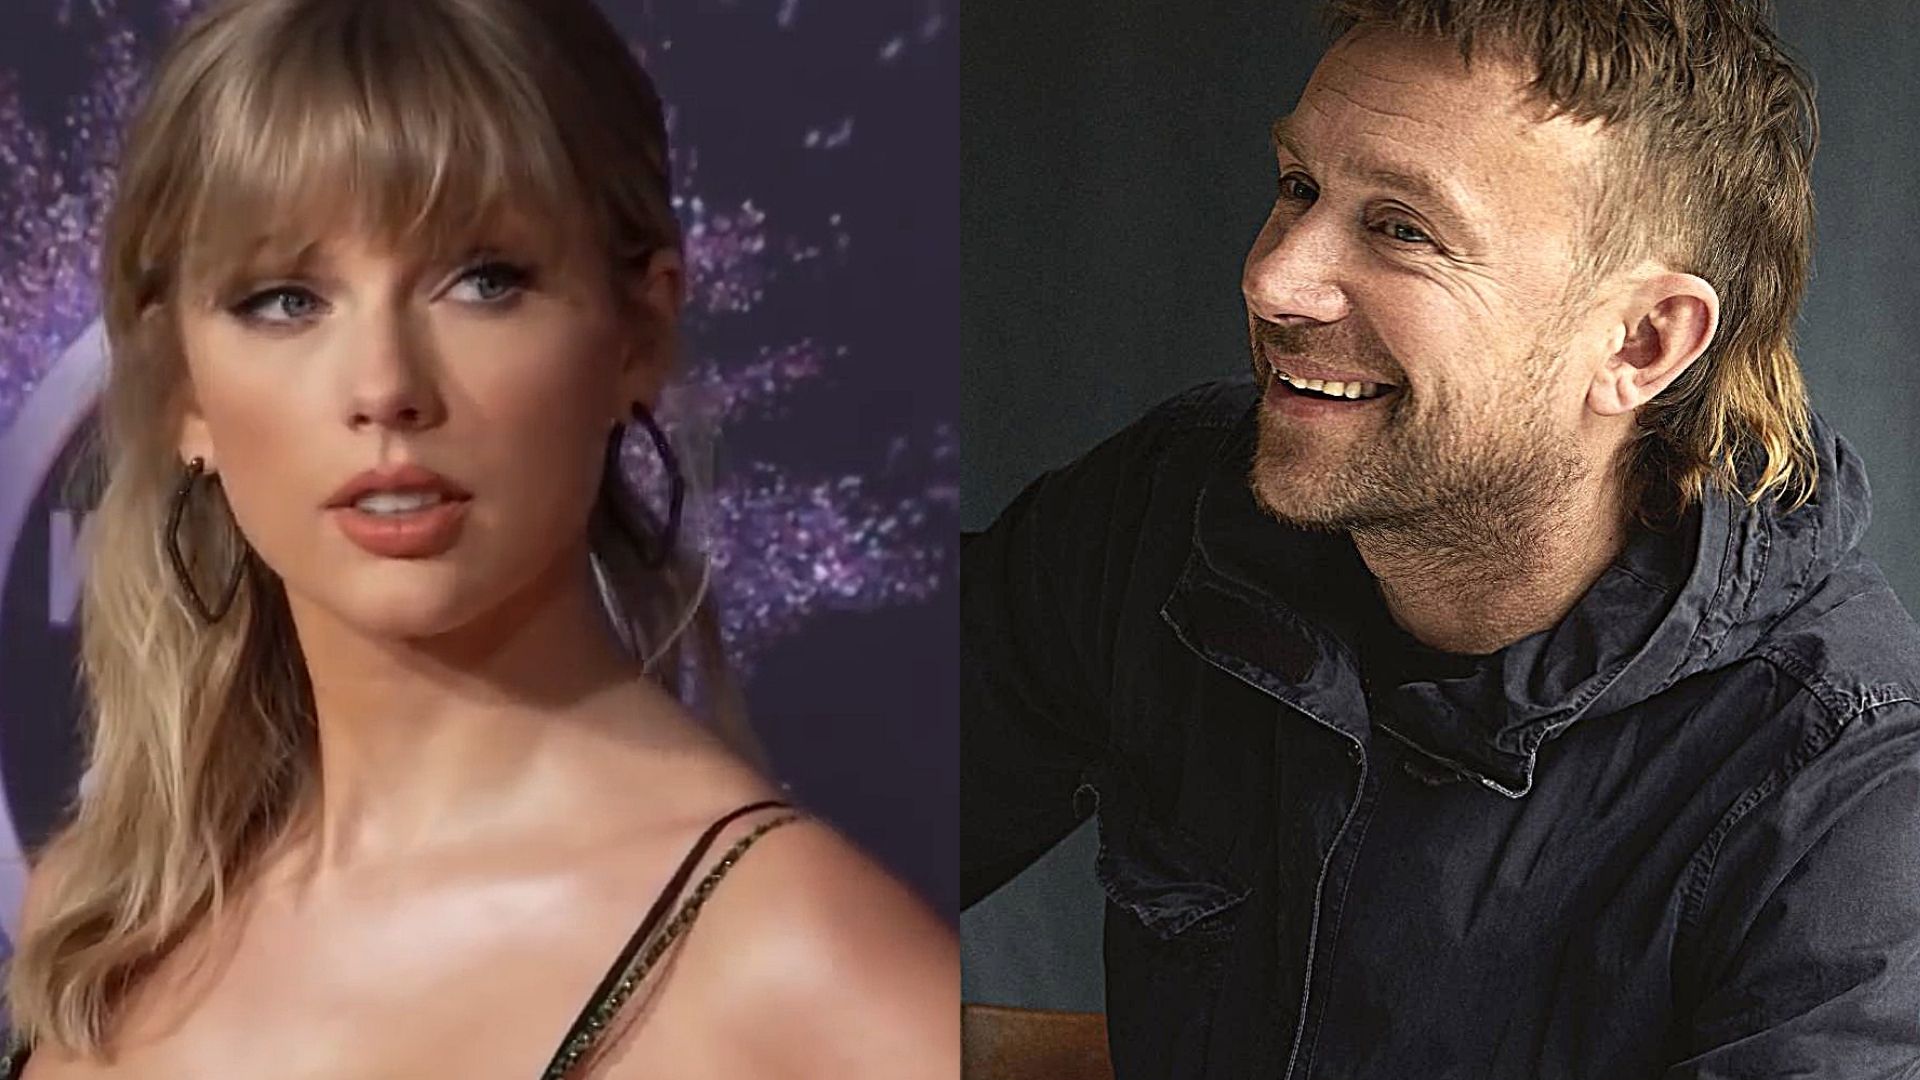 Damon Albarn Apologizes to Taylor Swift After She Slams Him for Saying She Doesn't Write Her Own Songs